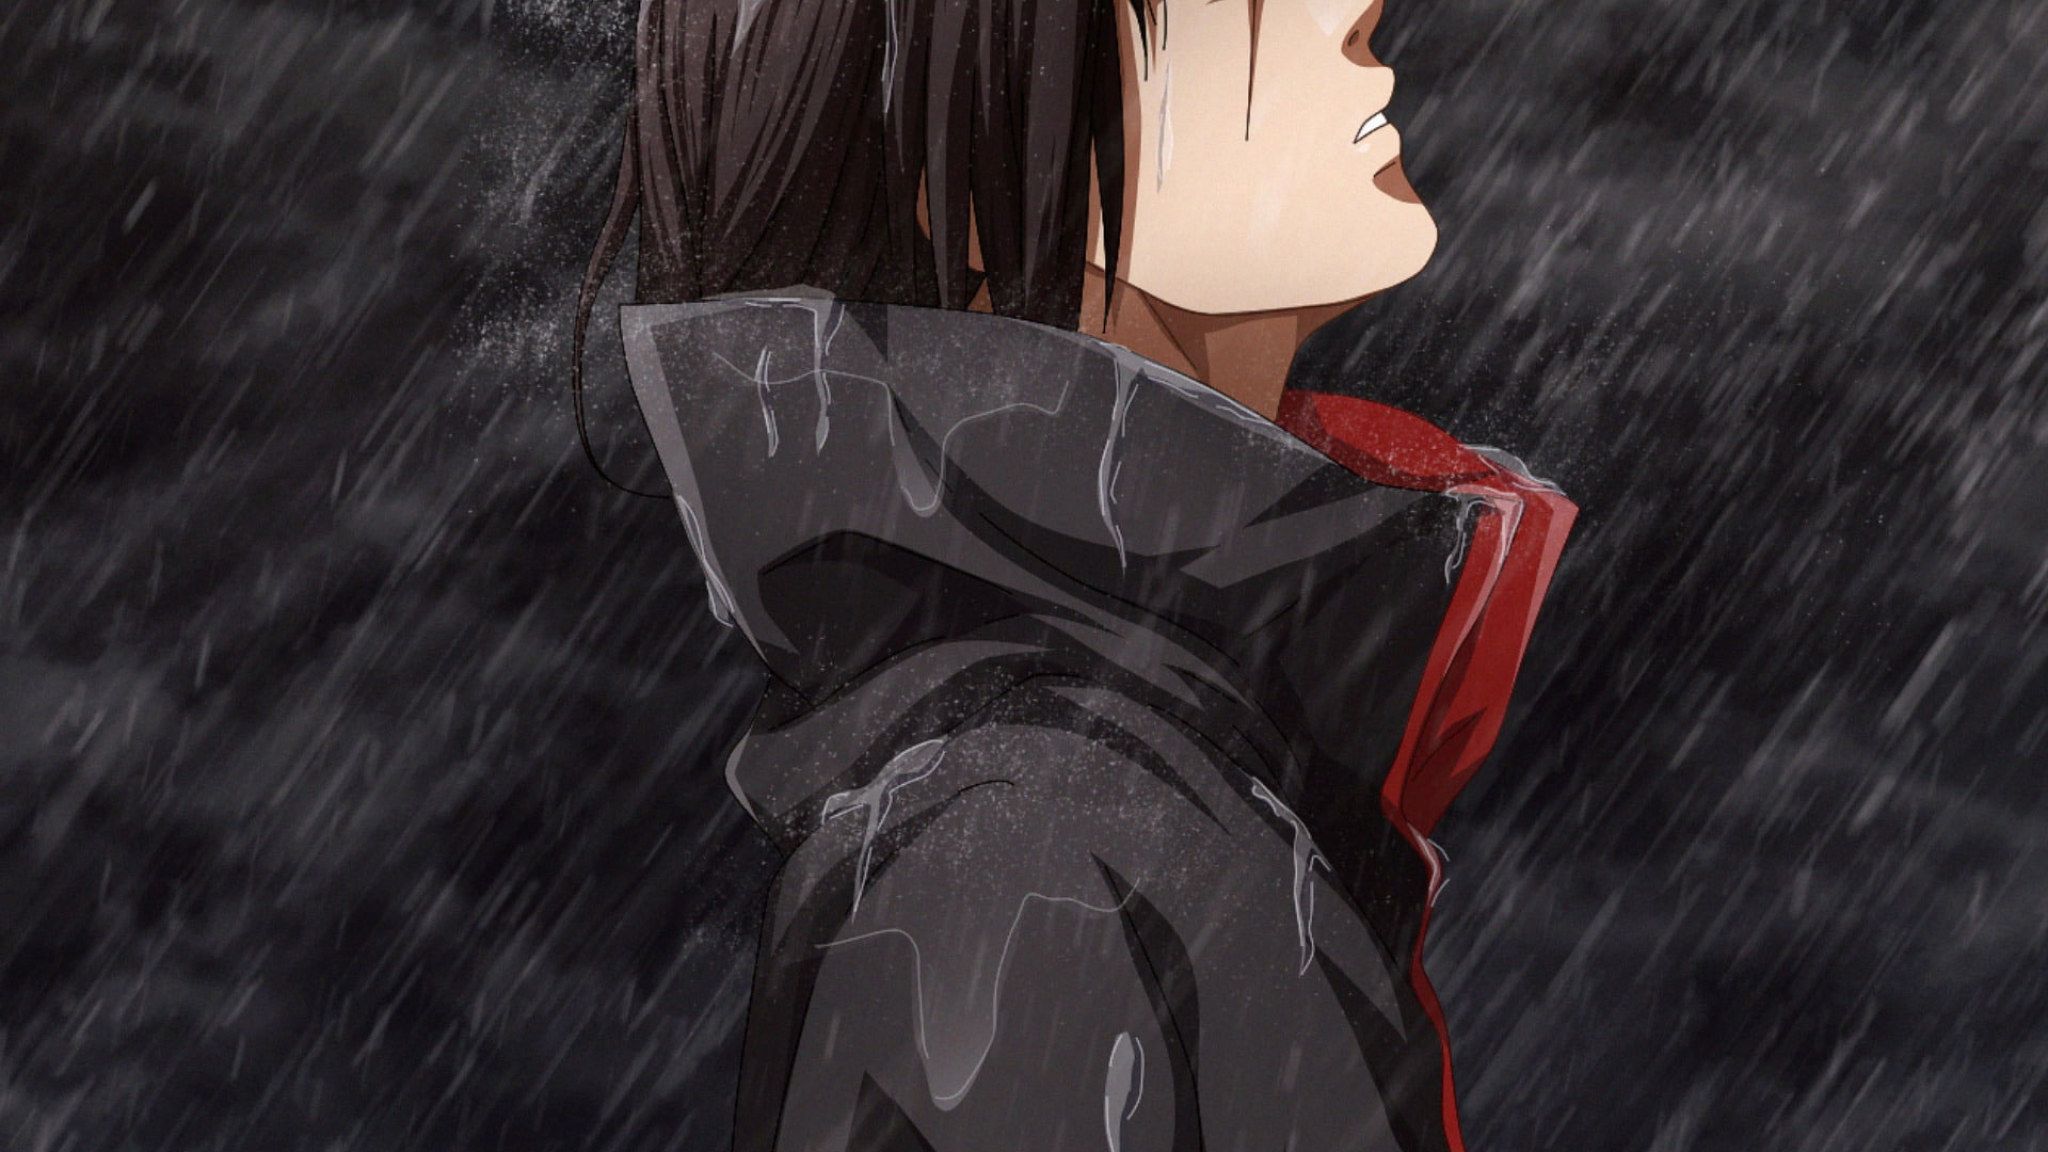 Aesthetic Itachi wallpaper by Ano714  Download on ZEDGE  9906